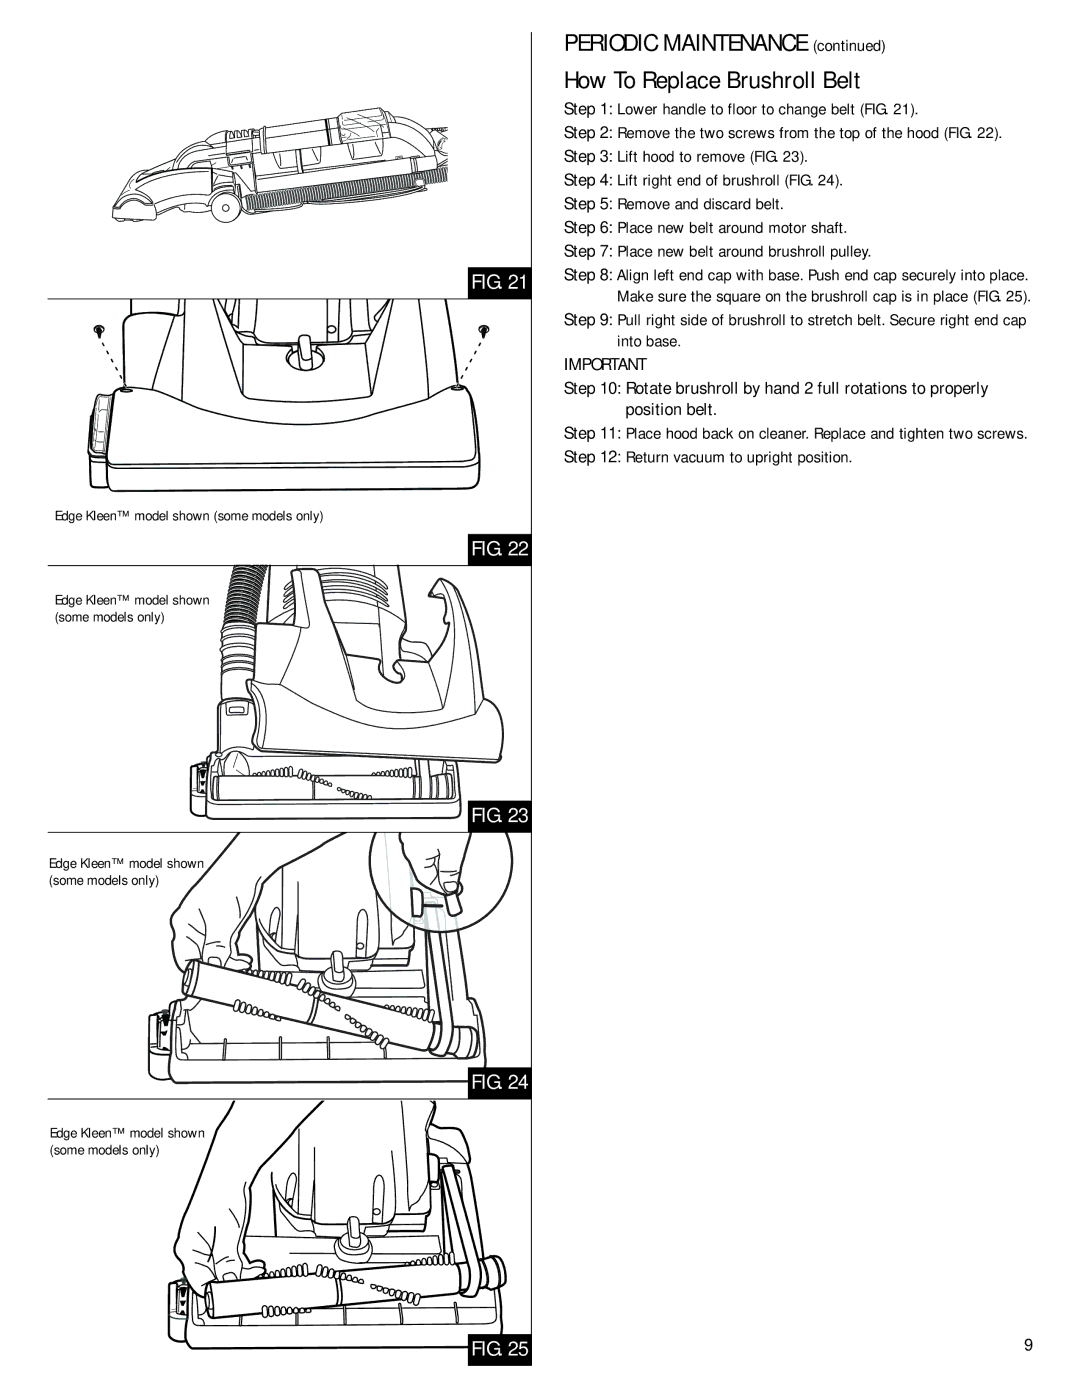 Electrolux Z2950 Series manual Periodic Maintenance How To Replace Brushroll Belt 